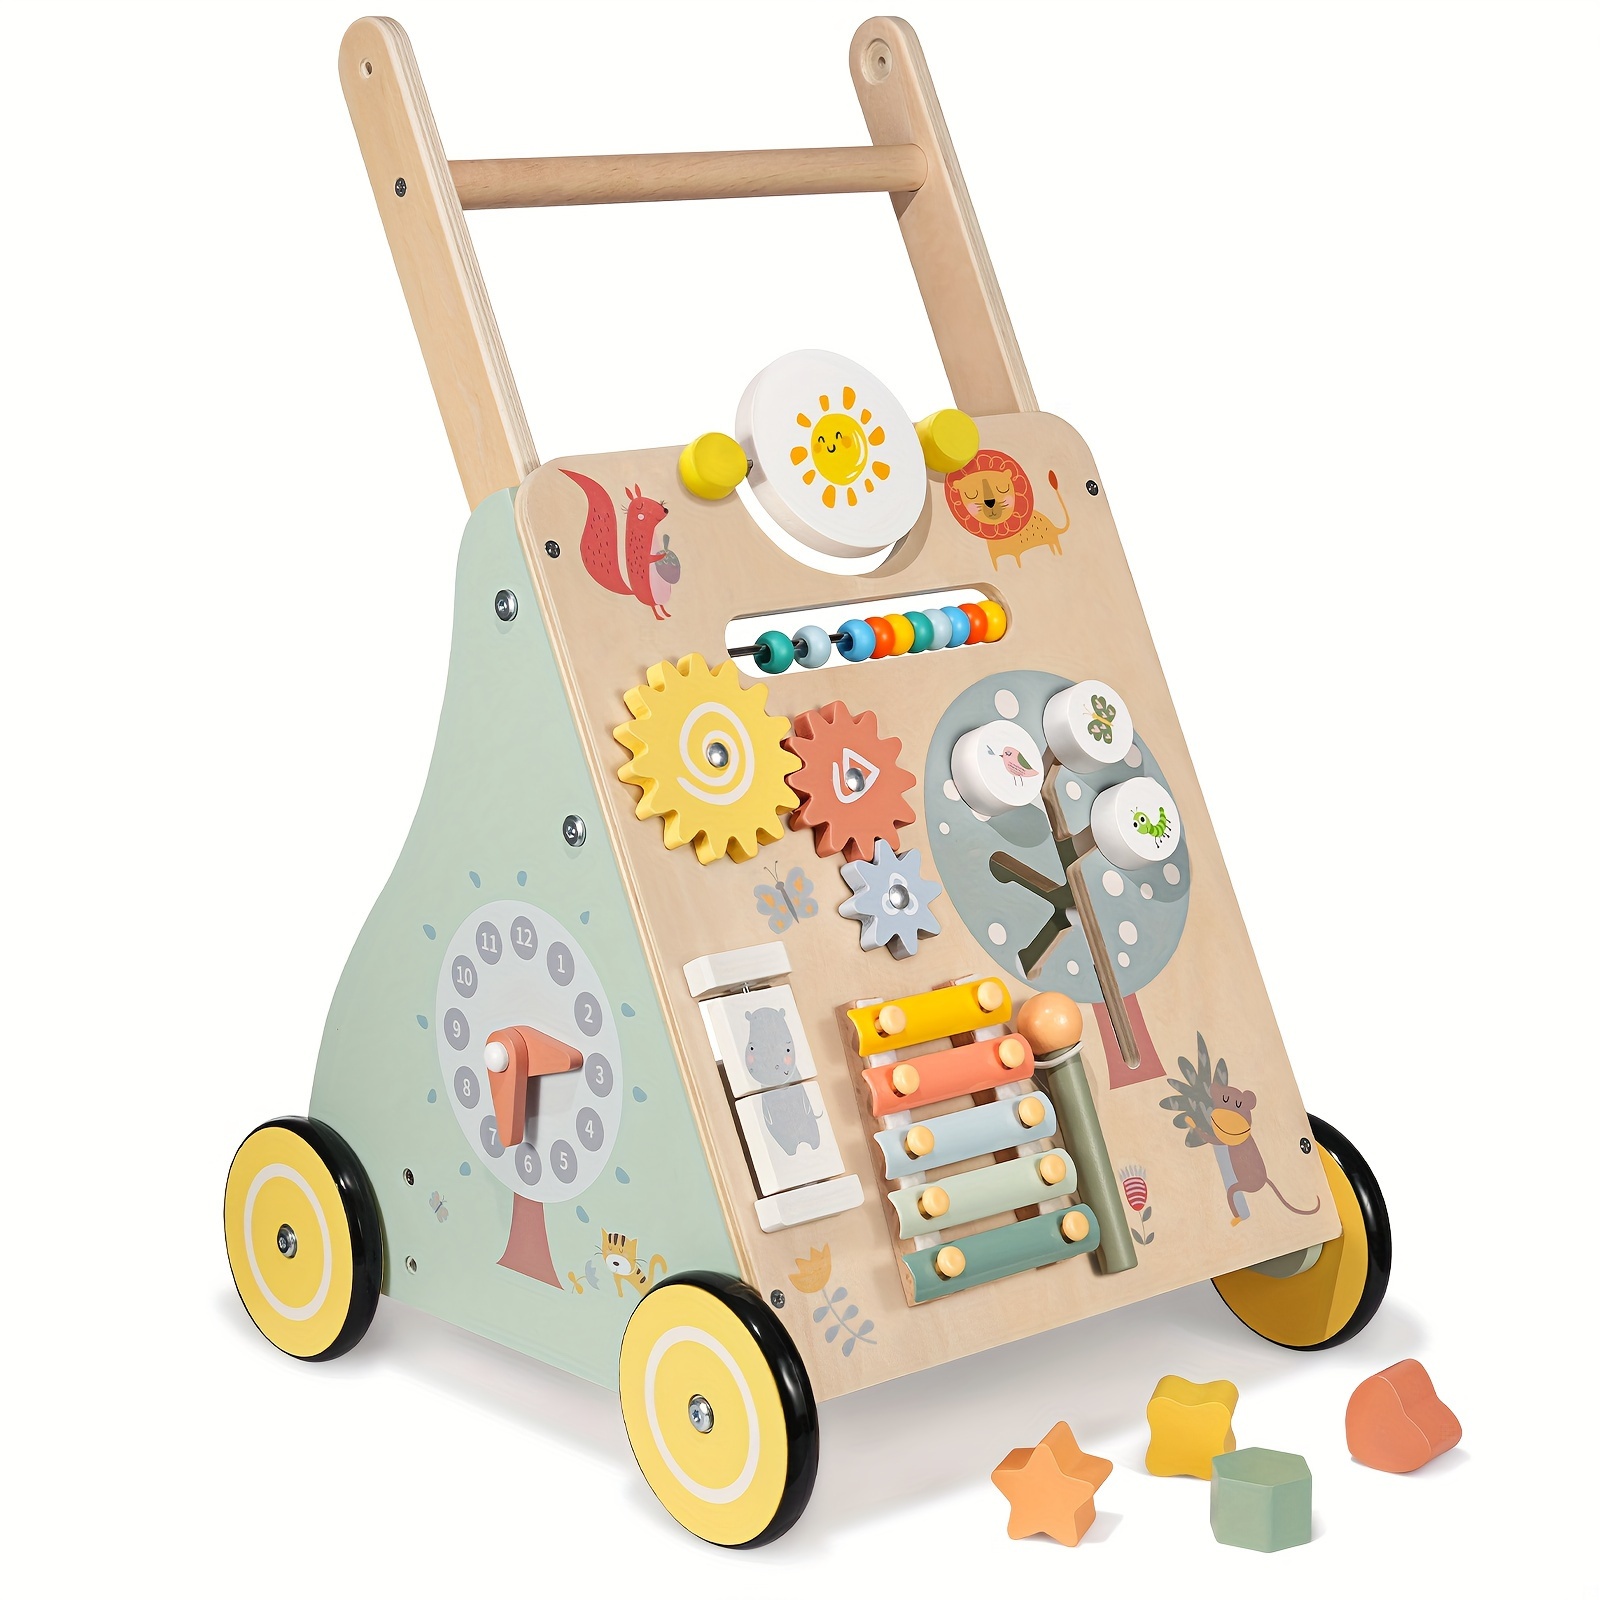 

Wooden Baby Walker, Multiple Learning Activities Center Develops Motor Skills For Infant To Toddler, Push And Pull Walkers With Wheel For Boys Girls